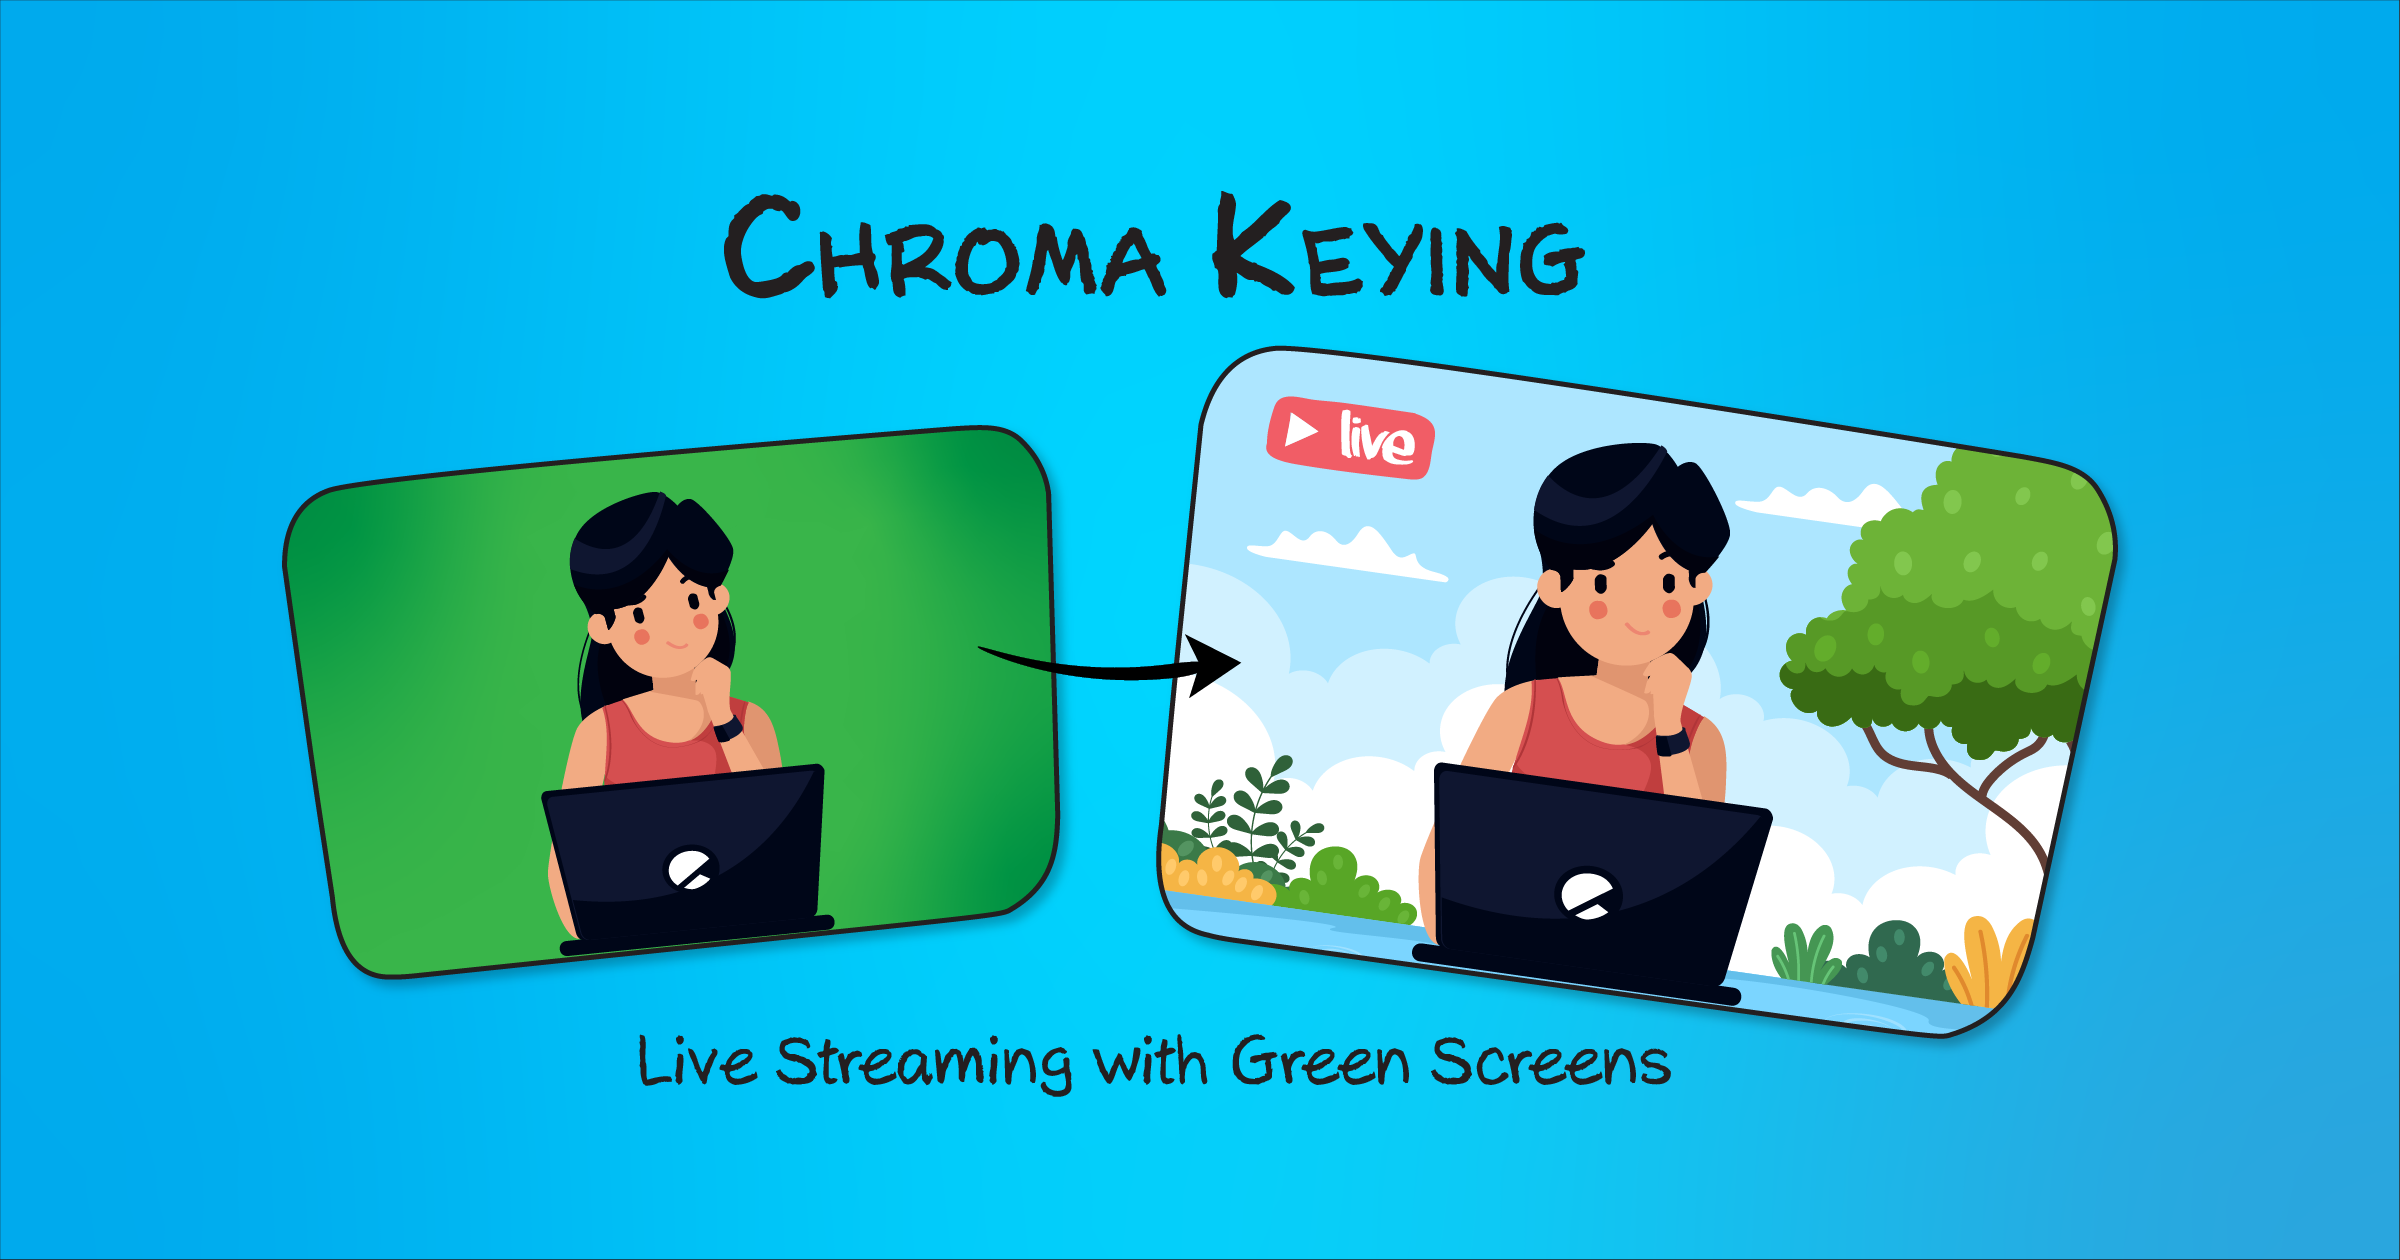 Chroma keying - live streaming with green screens